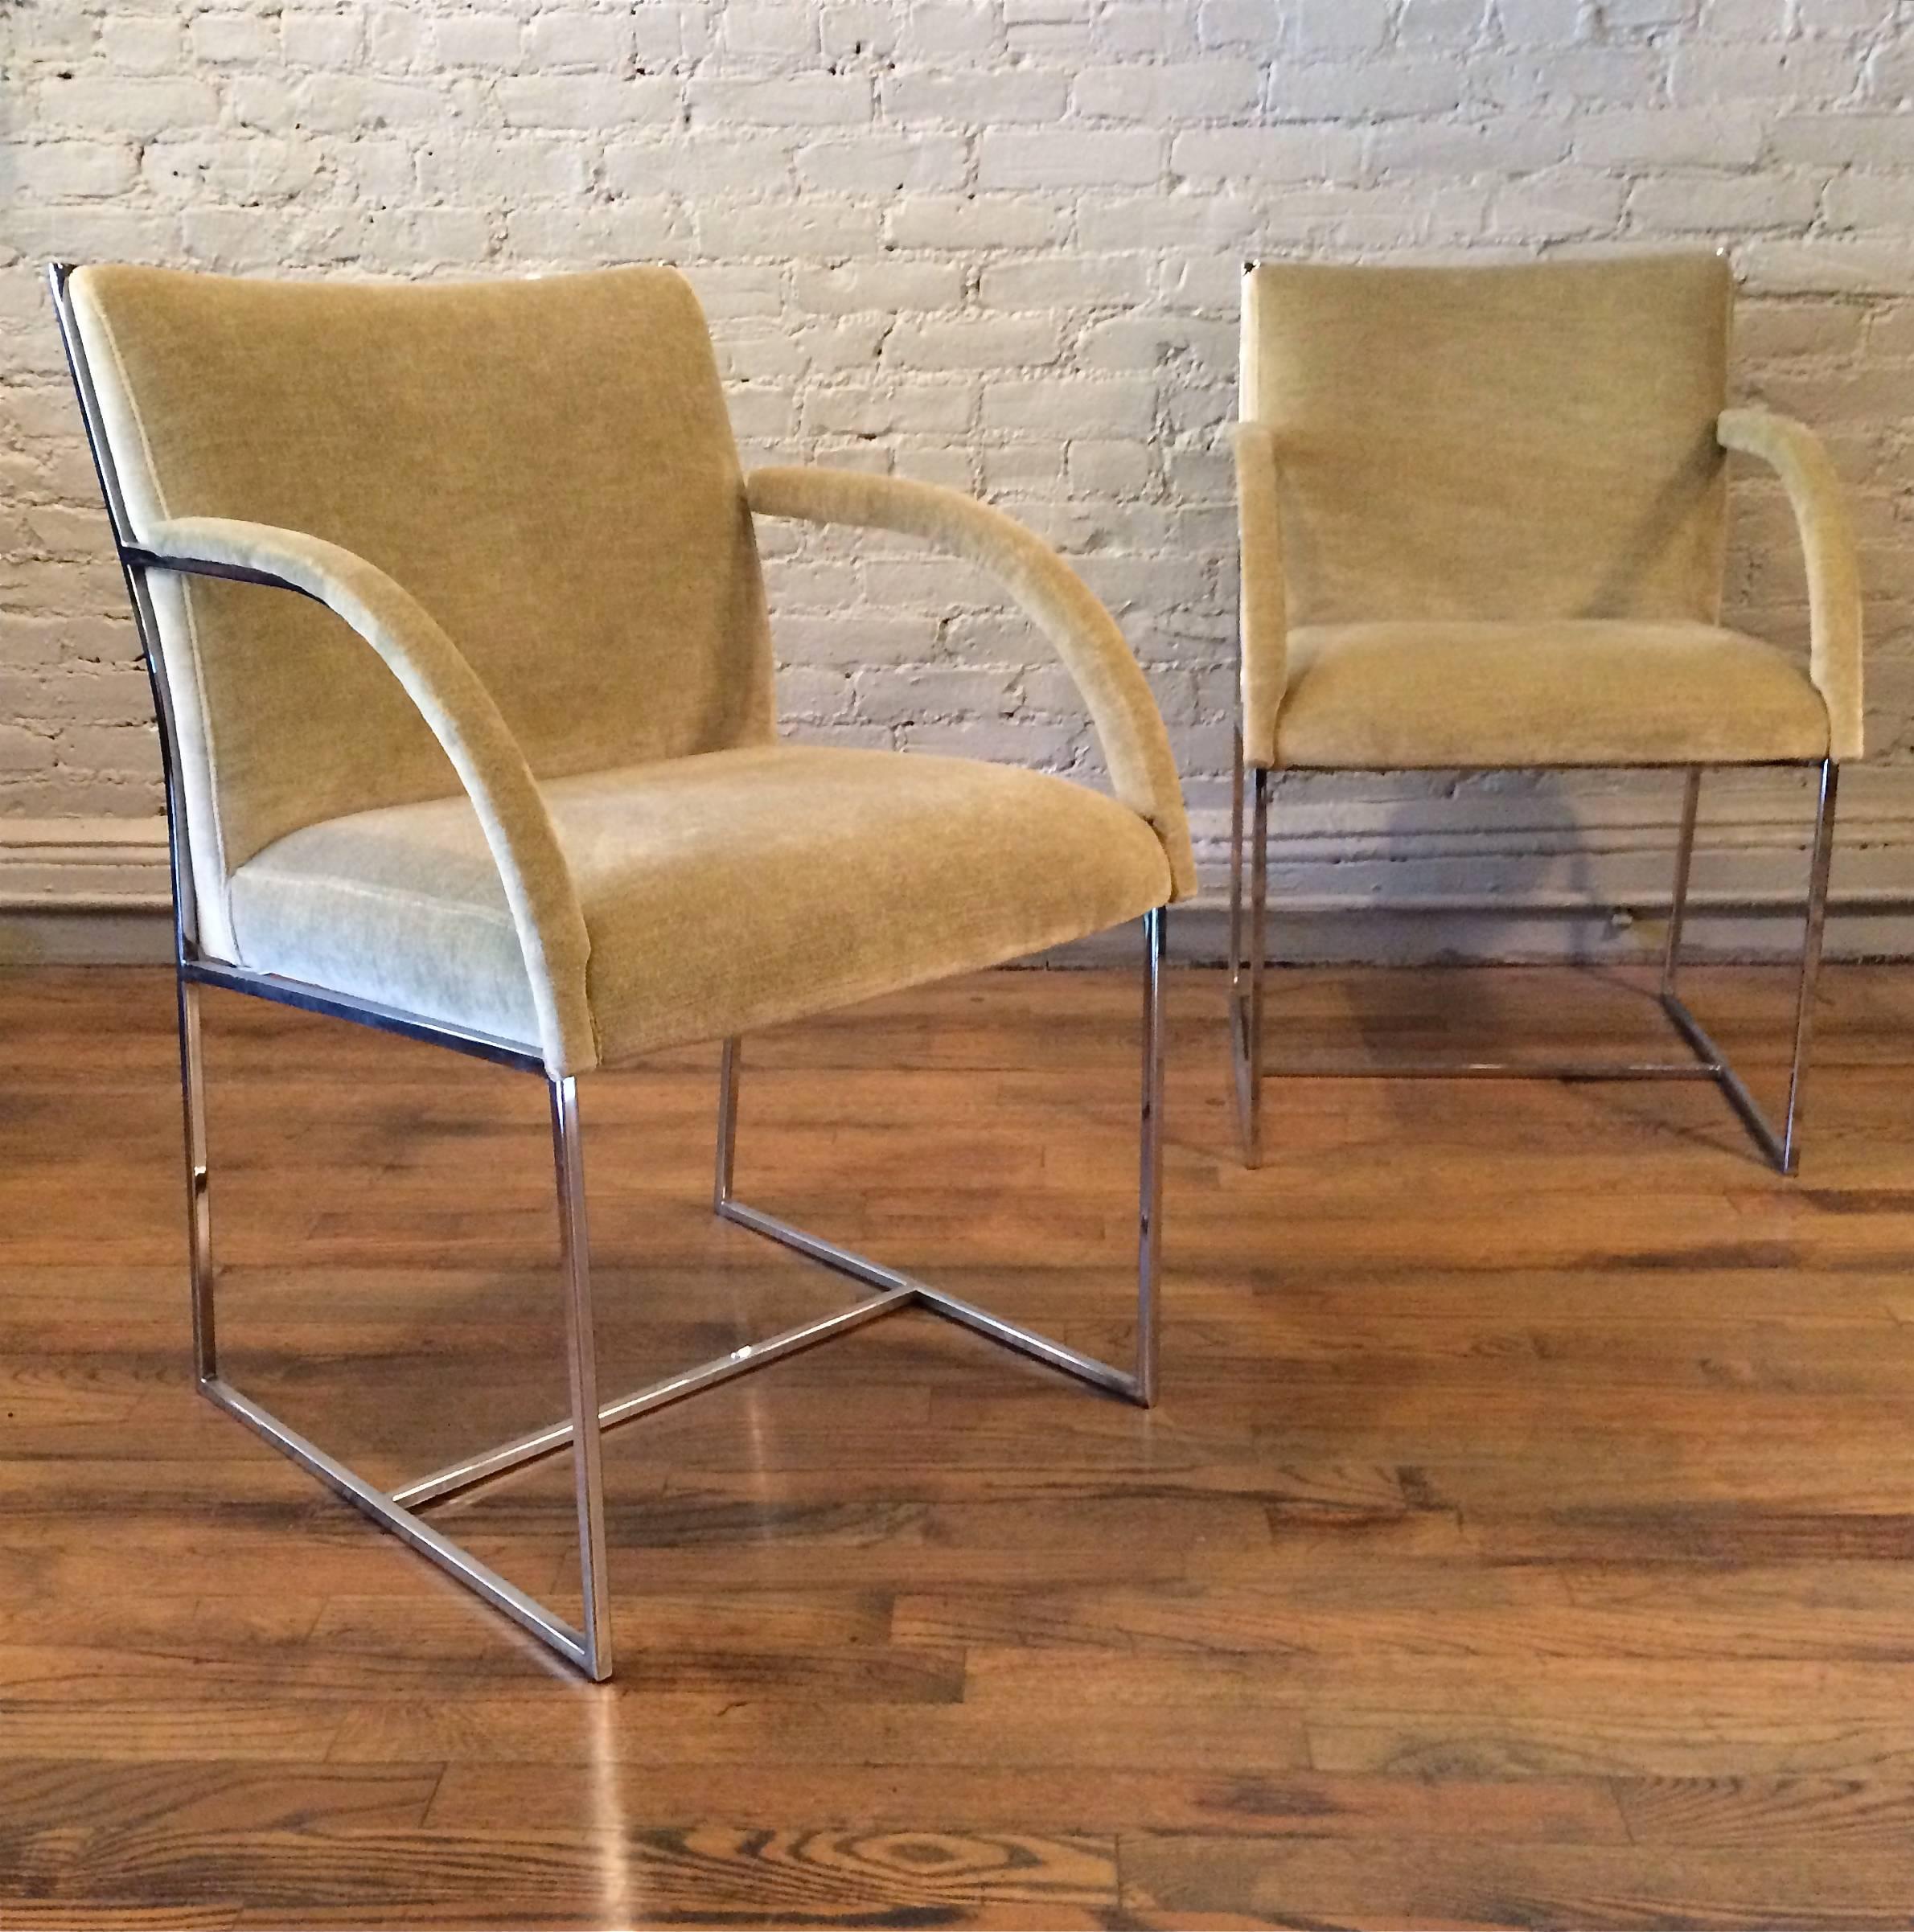 Pair of Mid-Century Modern armchairs in the style of Milo Baughman feature chrome frames with arching arms, newly upholstered in light pistachio green velvet.